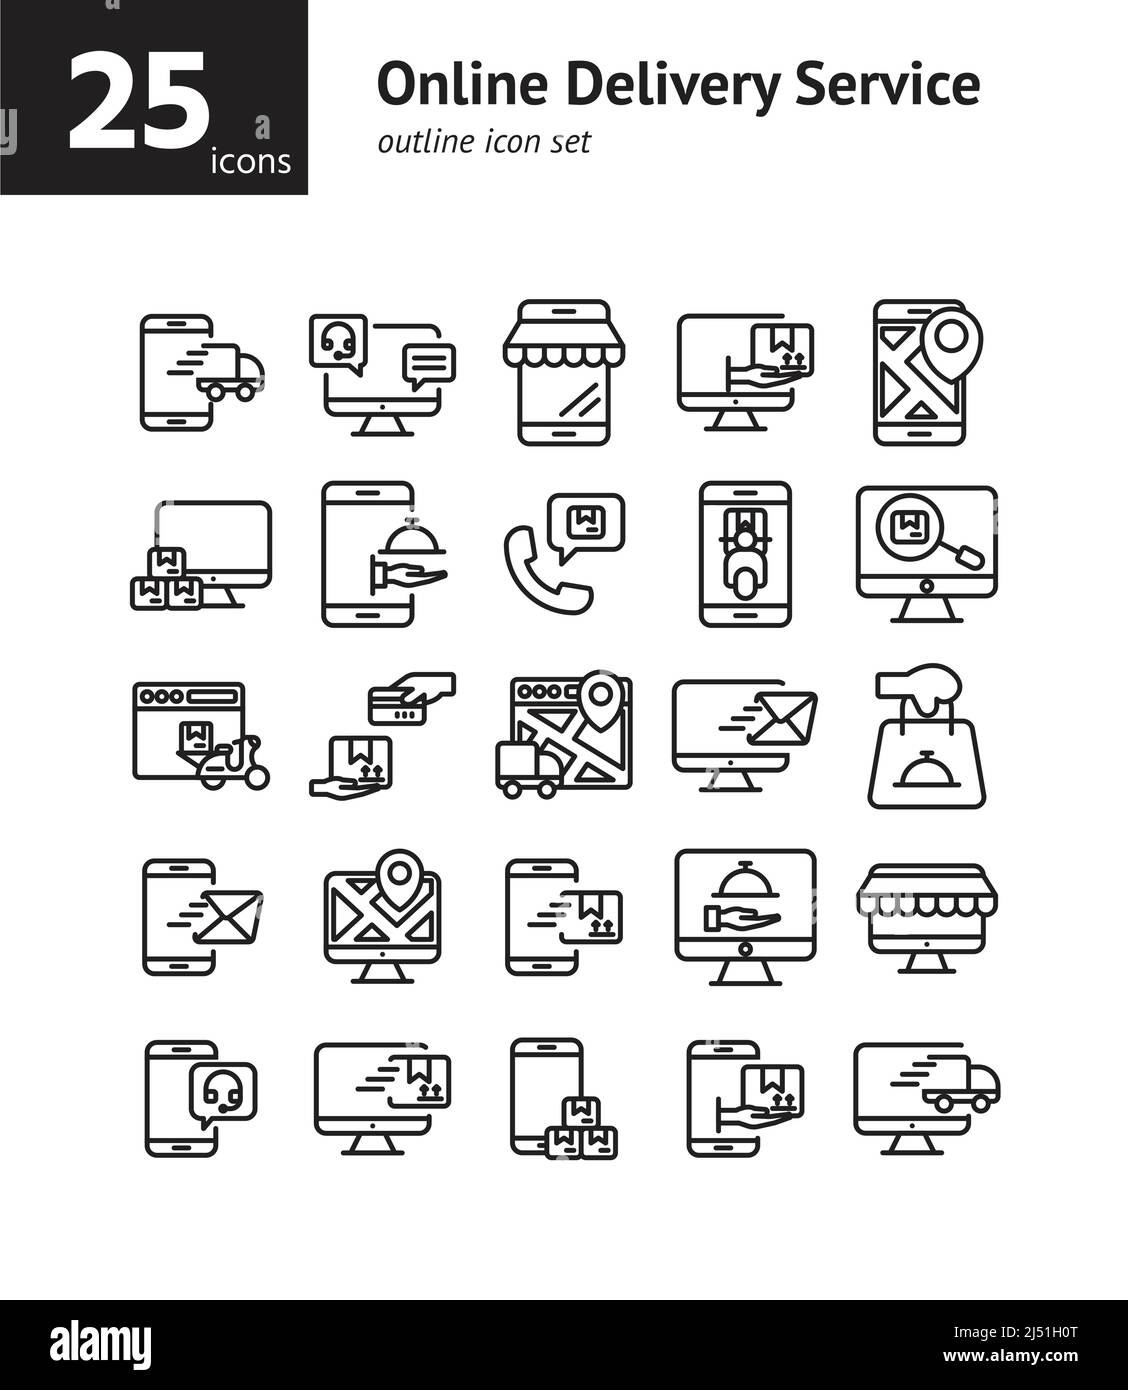 Online Delivery Service outline icon set. Vector and Illustration. Stock Vector